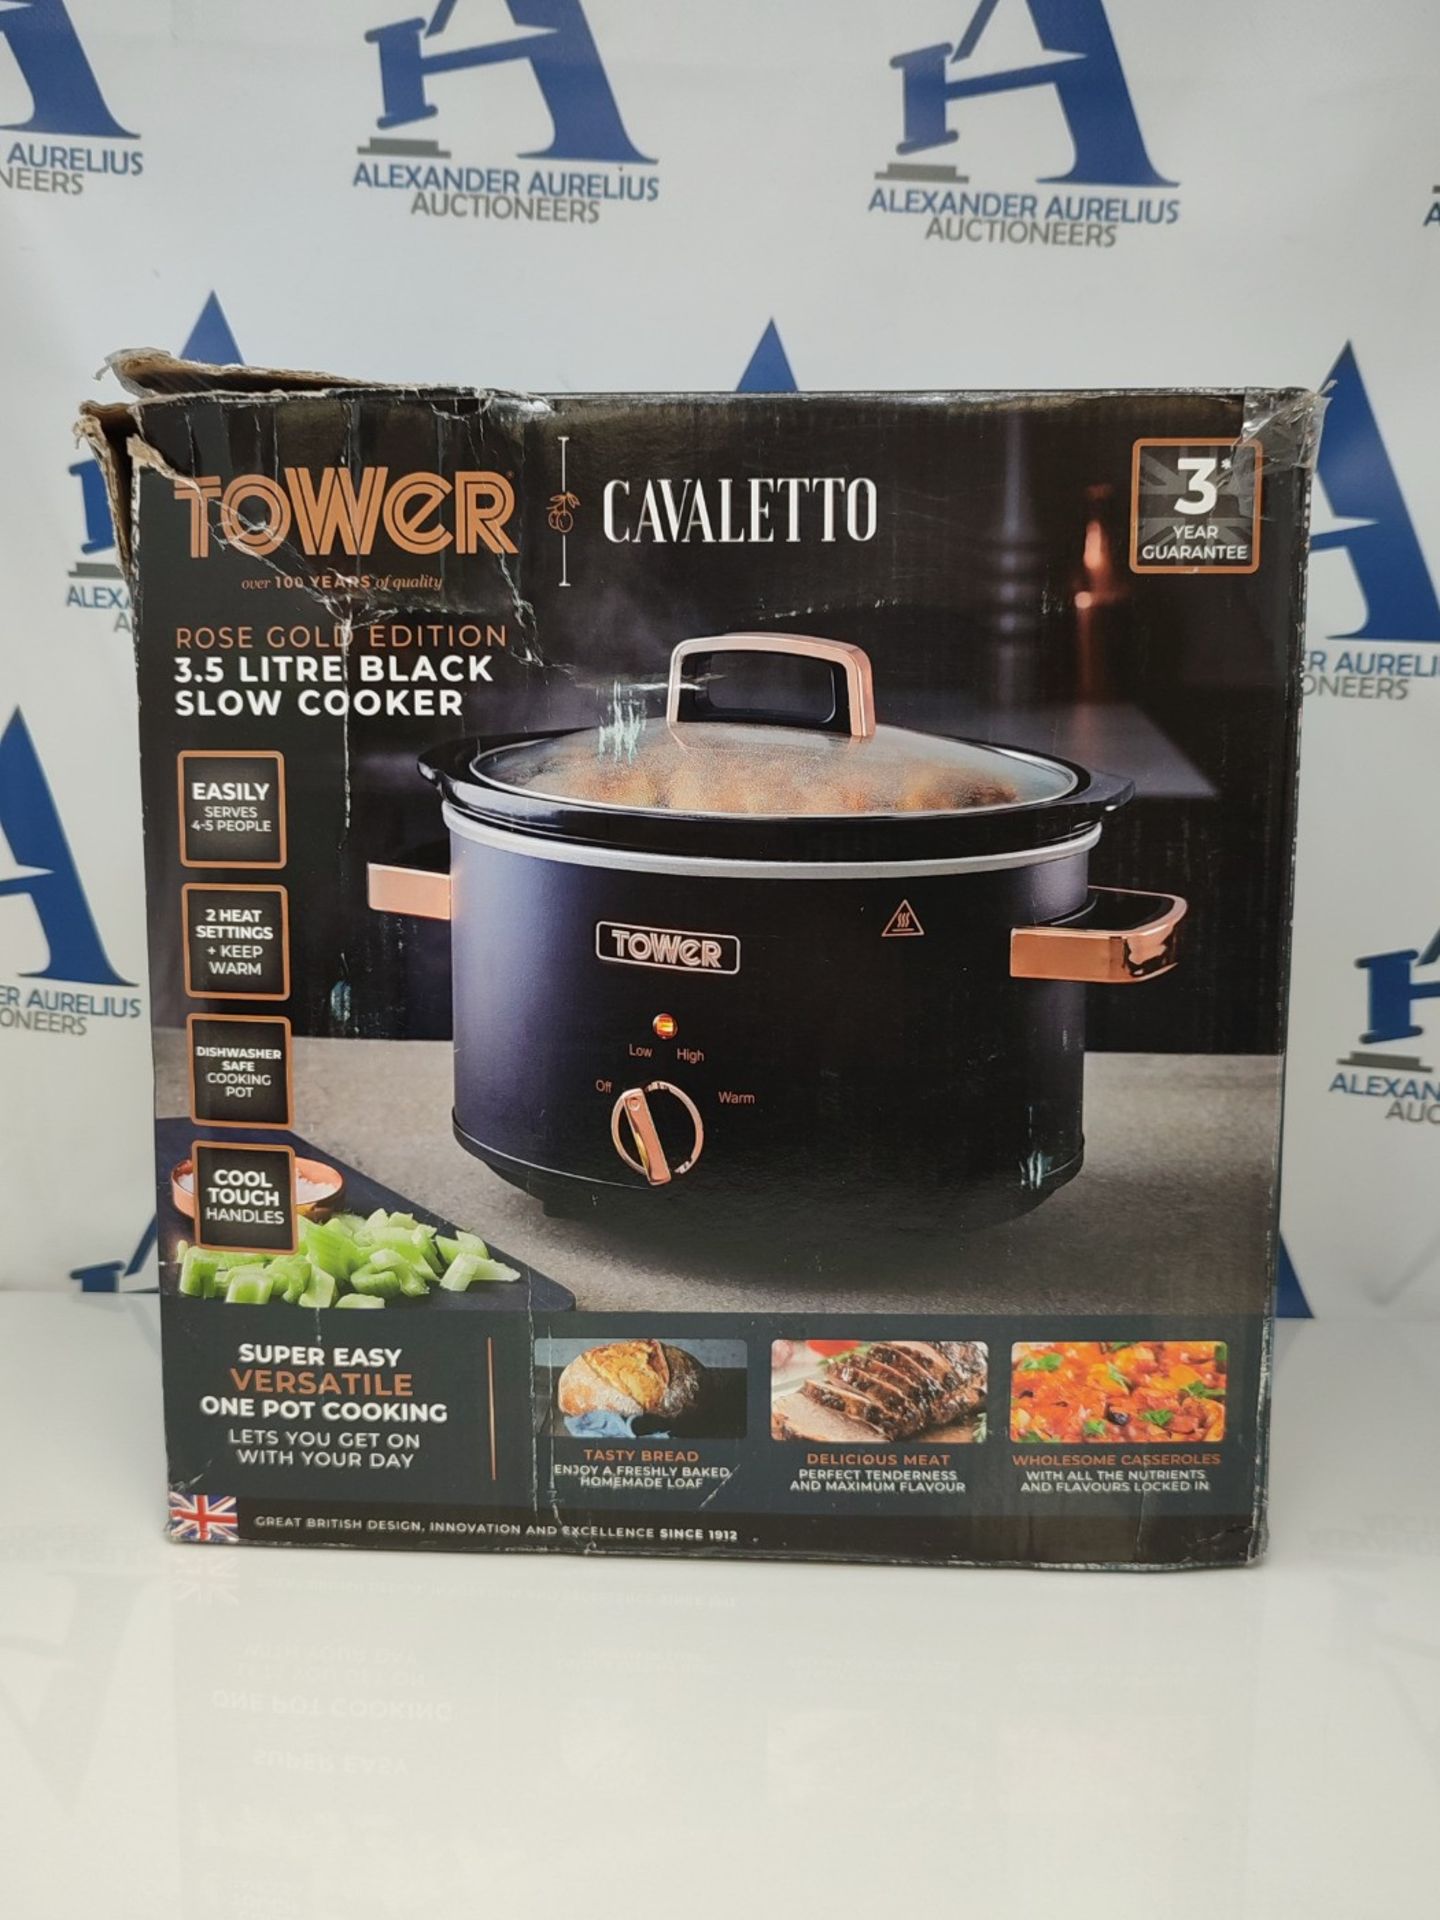 Tower T16042BLK Cavaletto 3.5 Litre Slow Cooker with 3 Heat Settings, Removable Pot an - Bild 2 aus 3